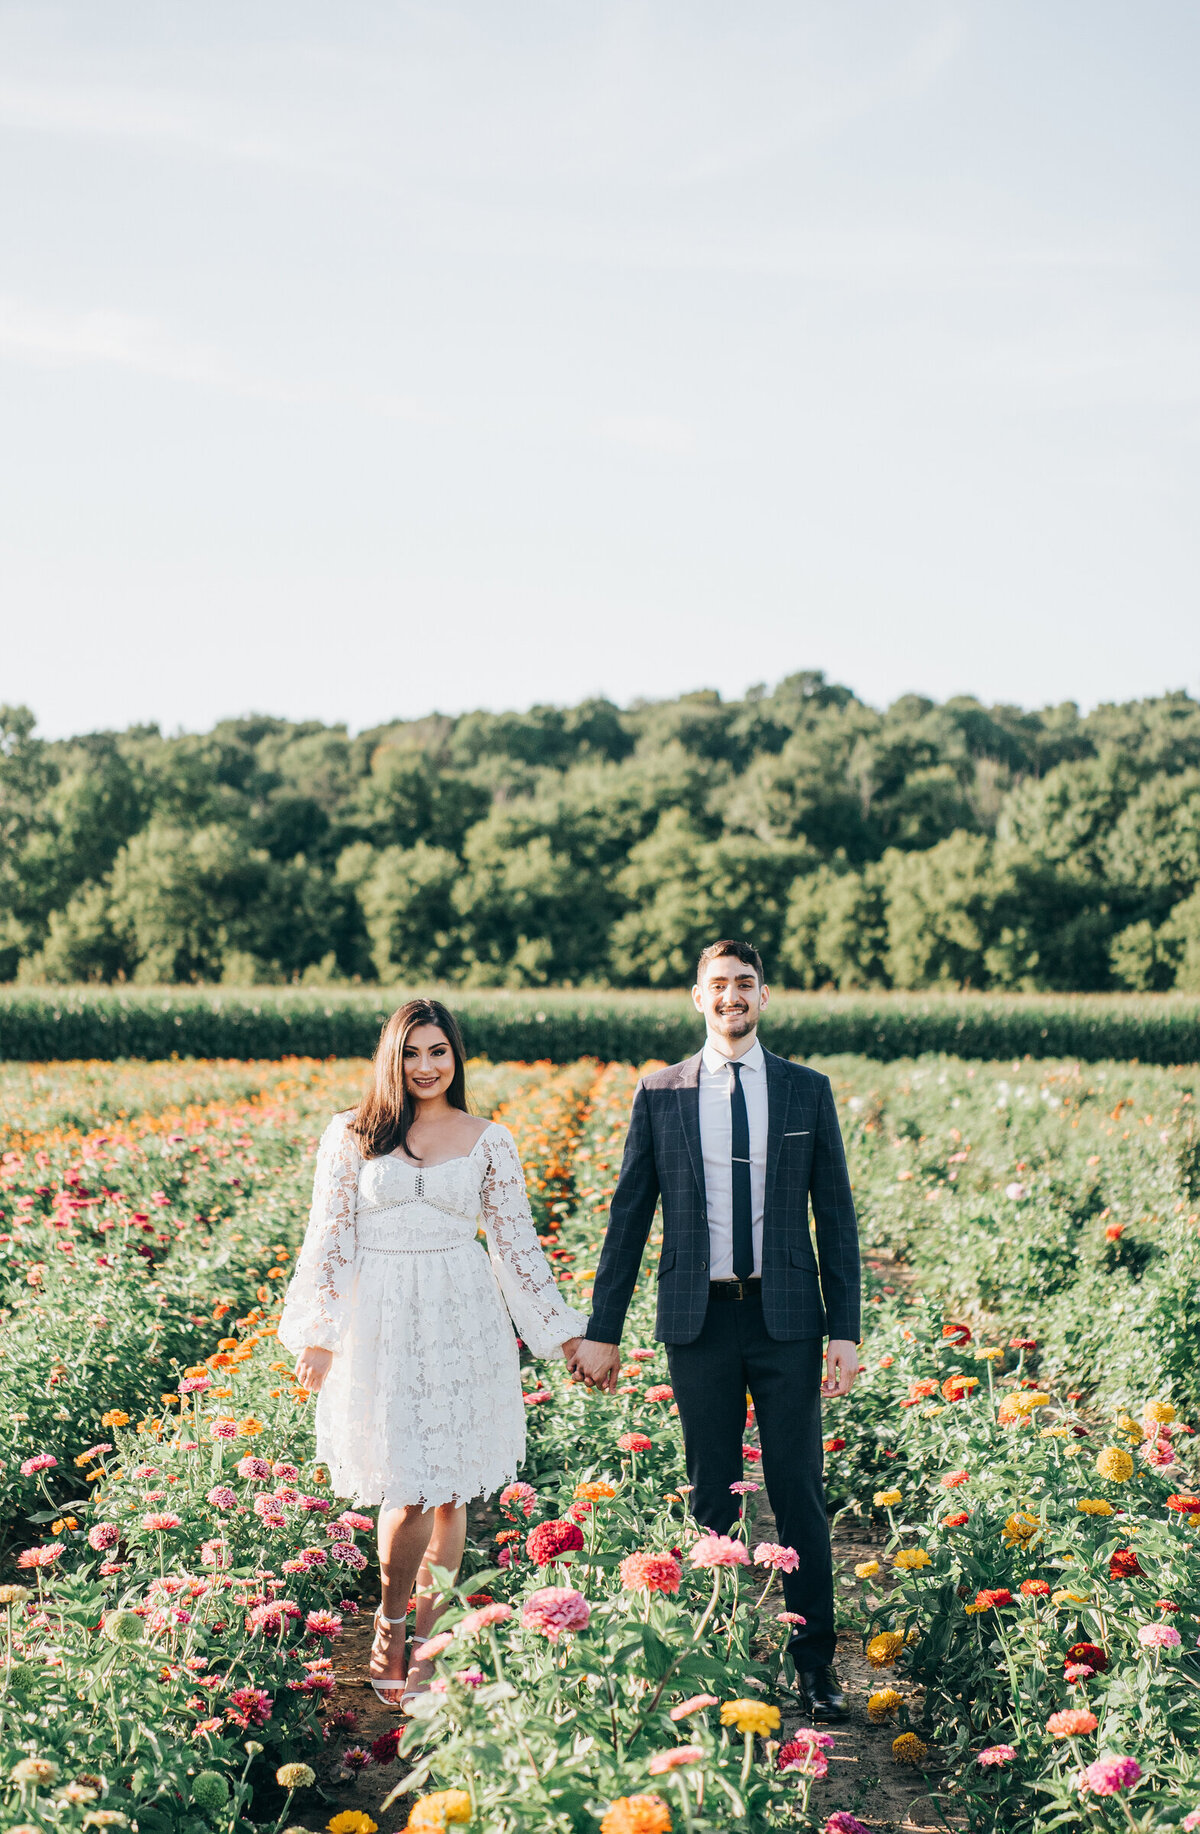 Couple holding hands and walking through a whimsical wildflower field during their Summer engagement session